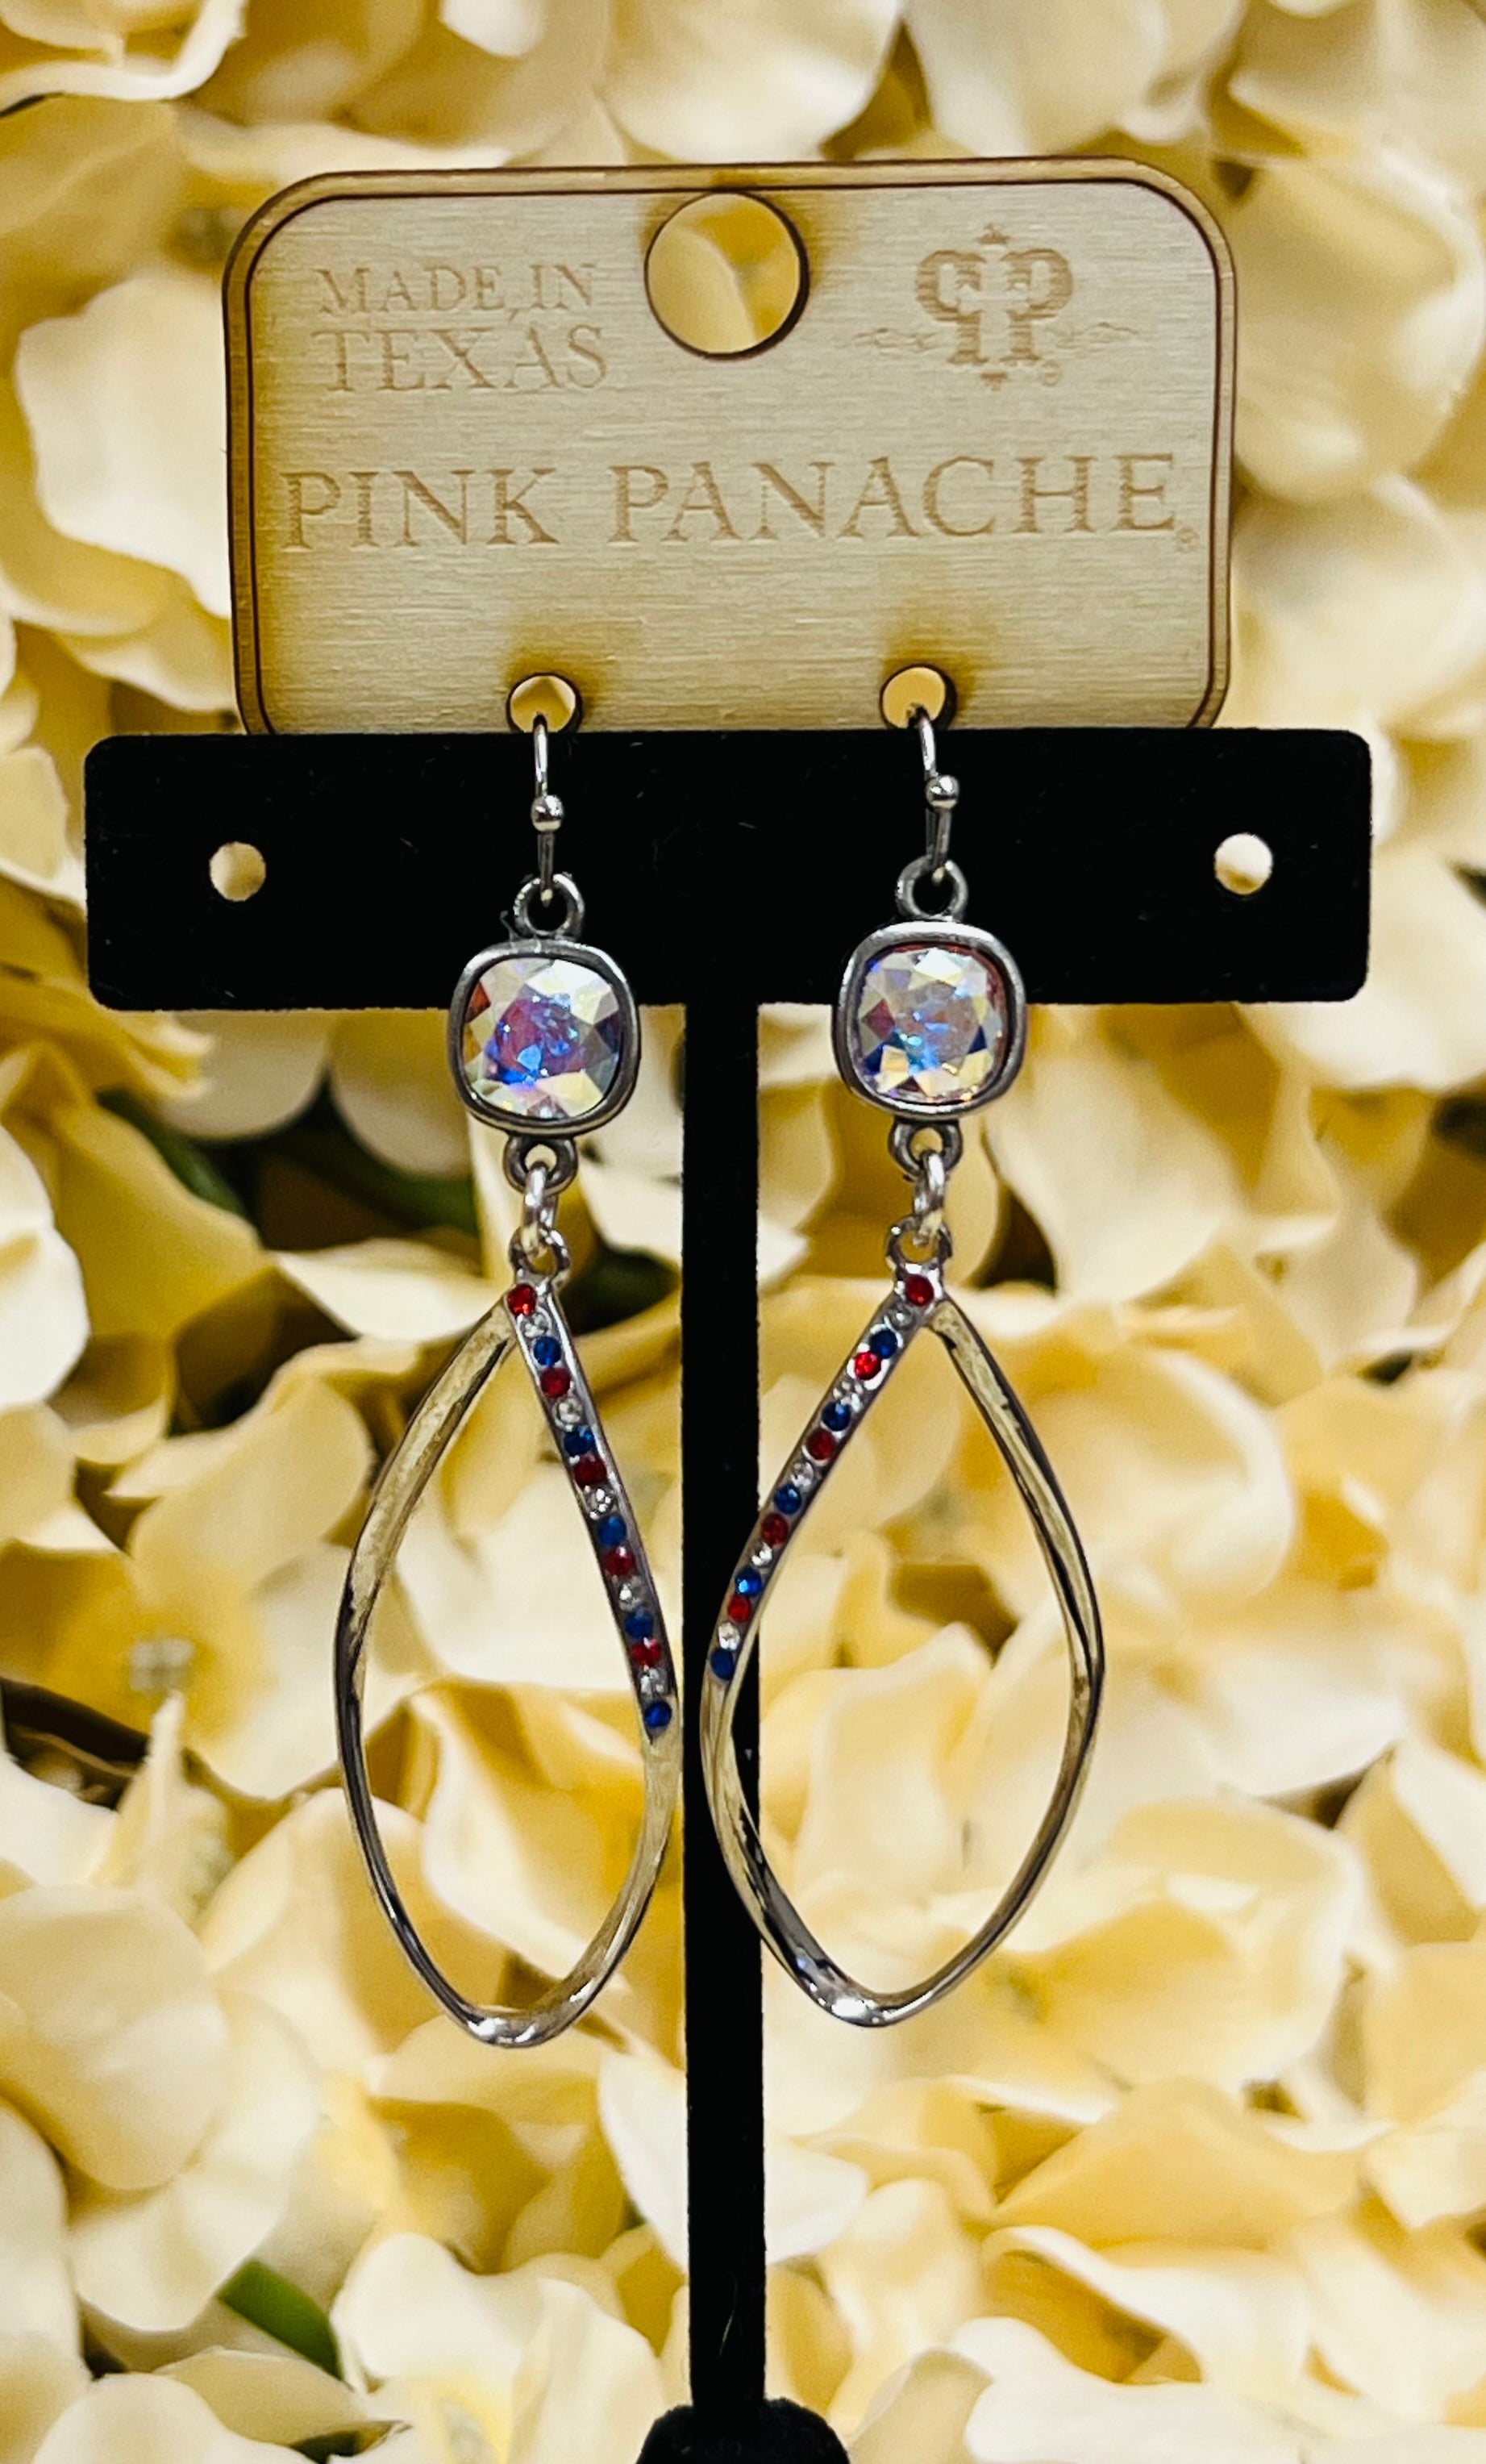 PINK PANACHE EARRINGS WITH RED WHITE AND BLUE CRYSTALS